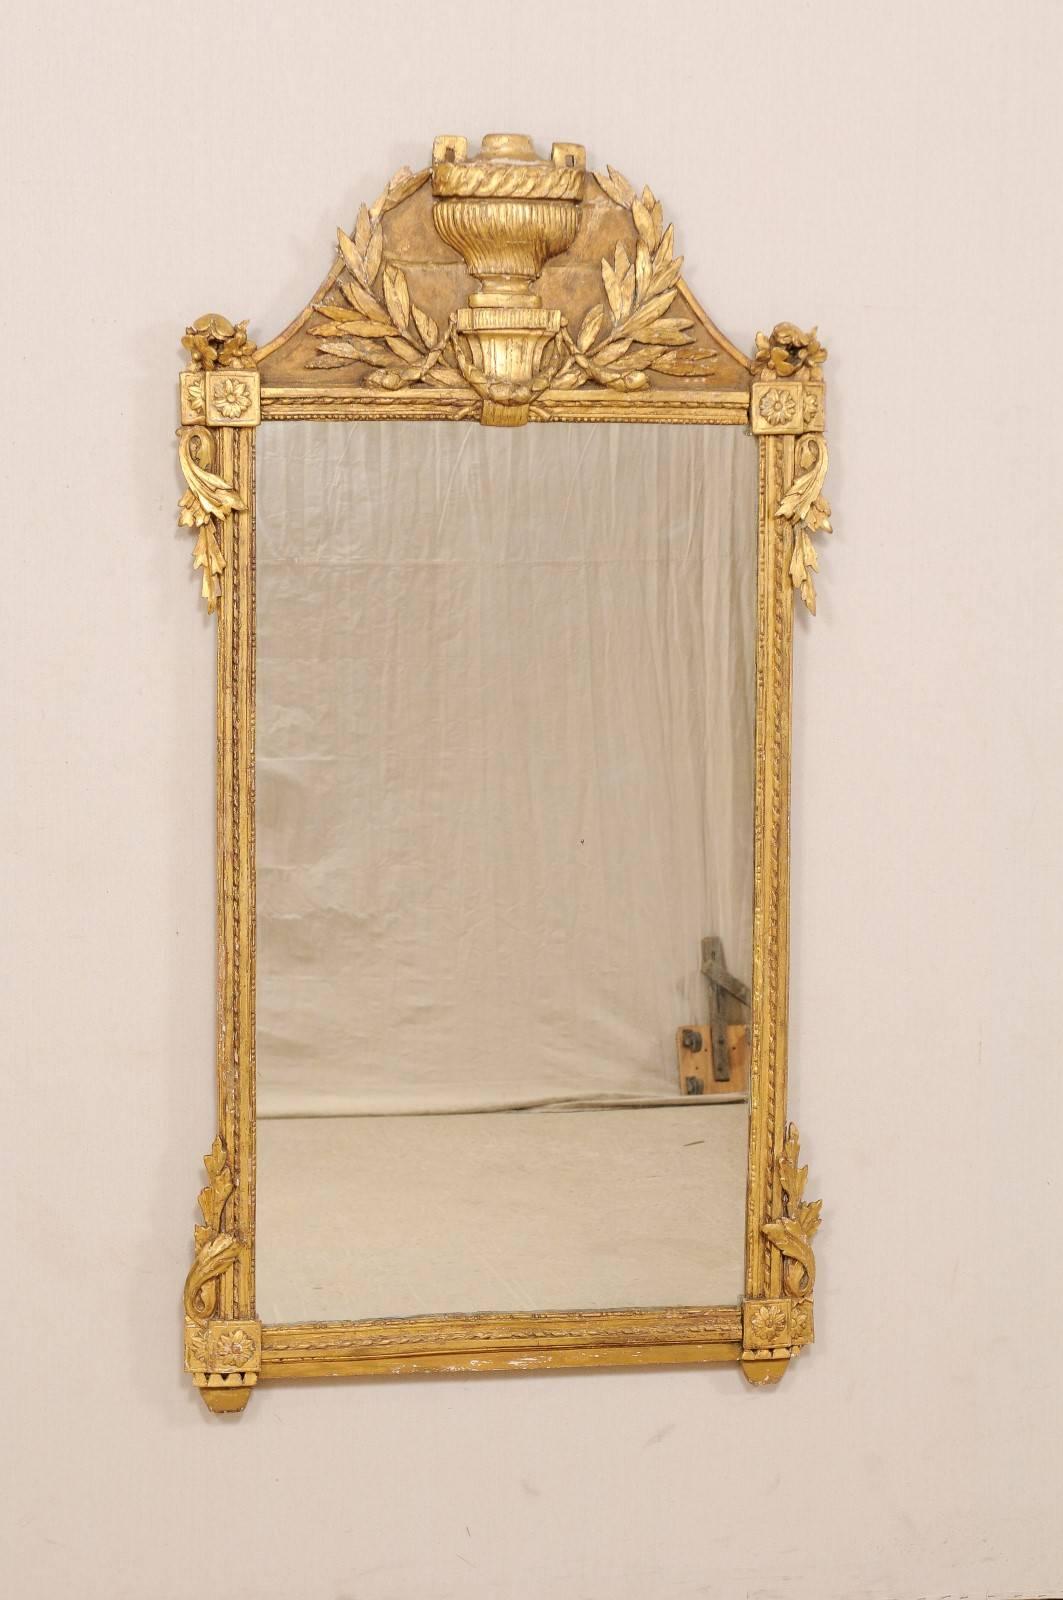 A French 18th century richly carved and gilded wood mirror. This French tall giltwood rectangular wall mirror features a wonderfully carved crest with leaves and urn at it's centre. There are sweet floral and leafy accents at each the mirror's